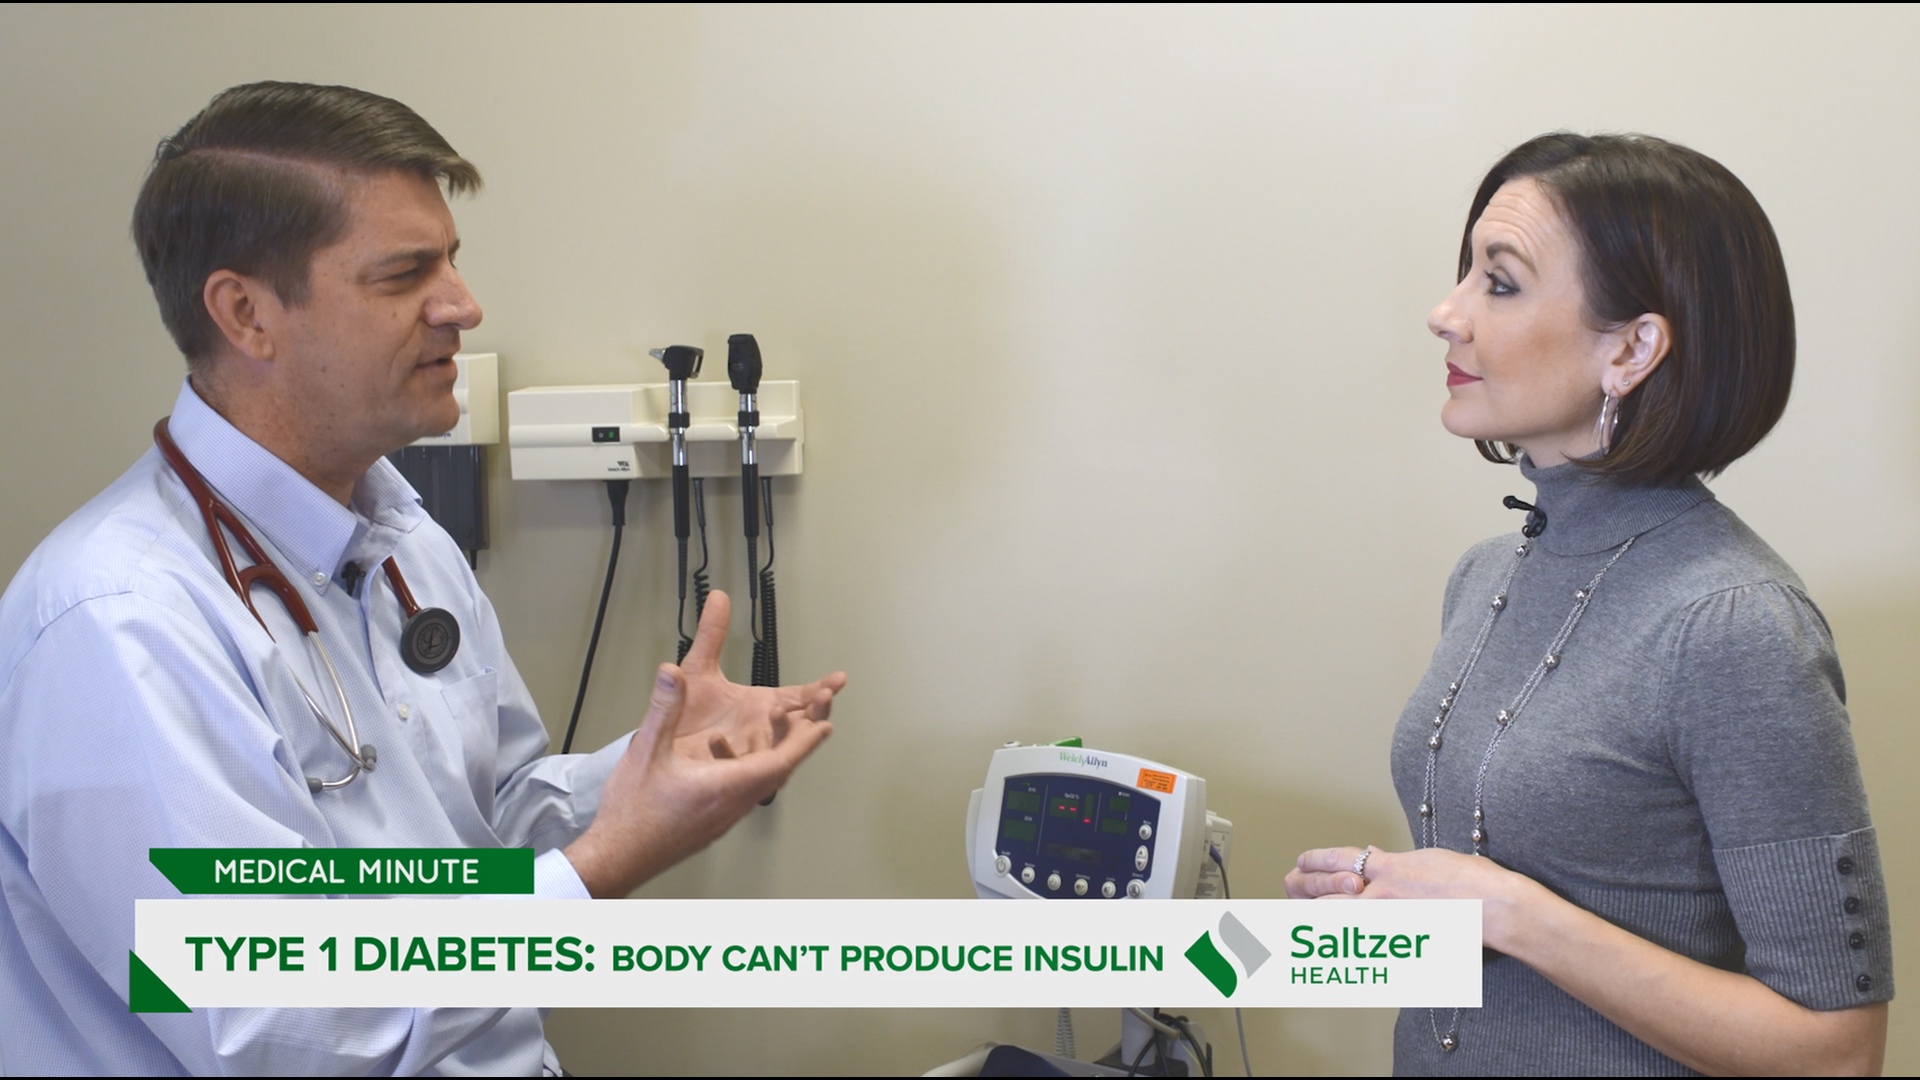 Our weight and diet plays a big role in the potential for developing diabetes, Dr. Erik Richardson gives tips on how to avoid this diagnosis.